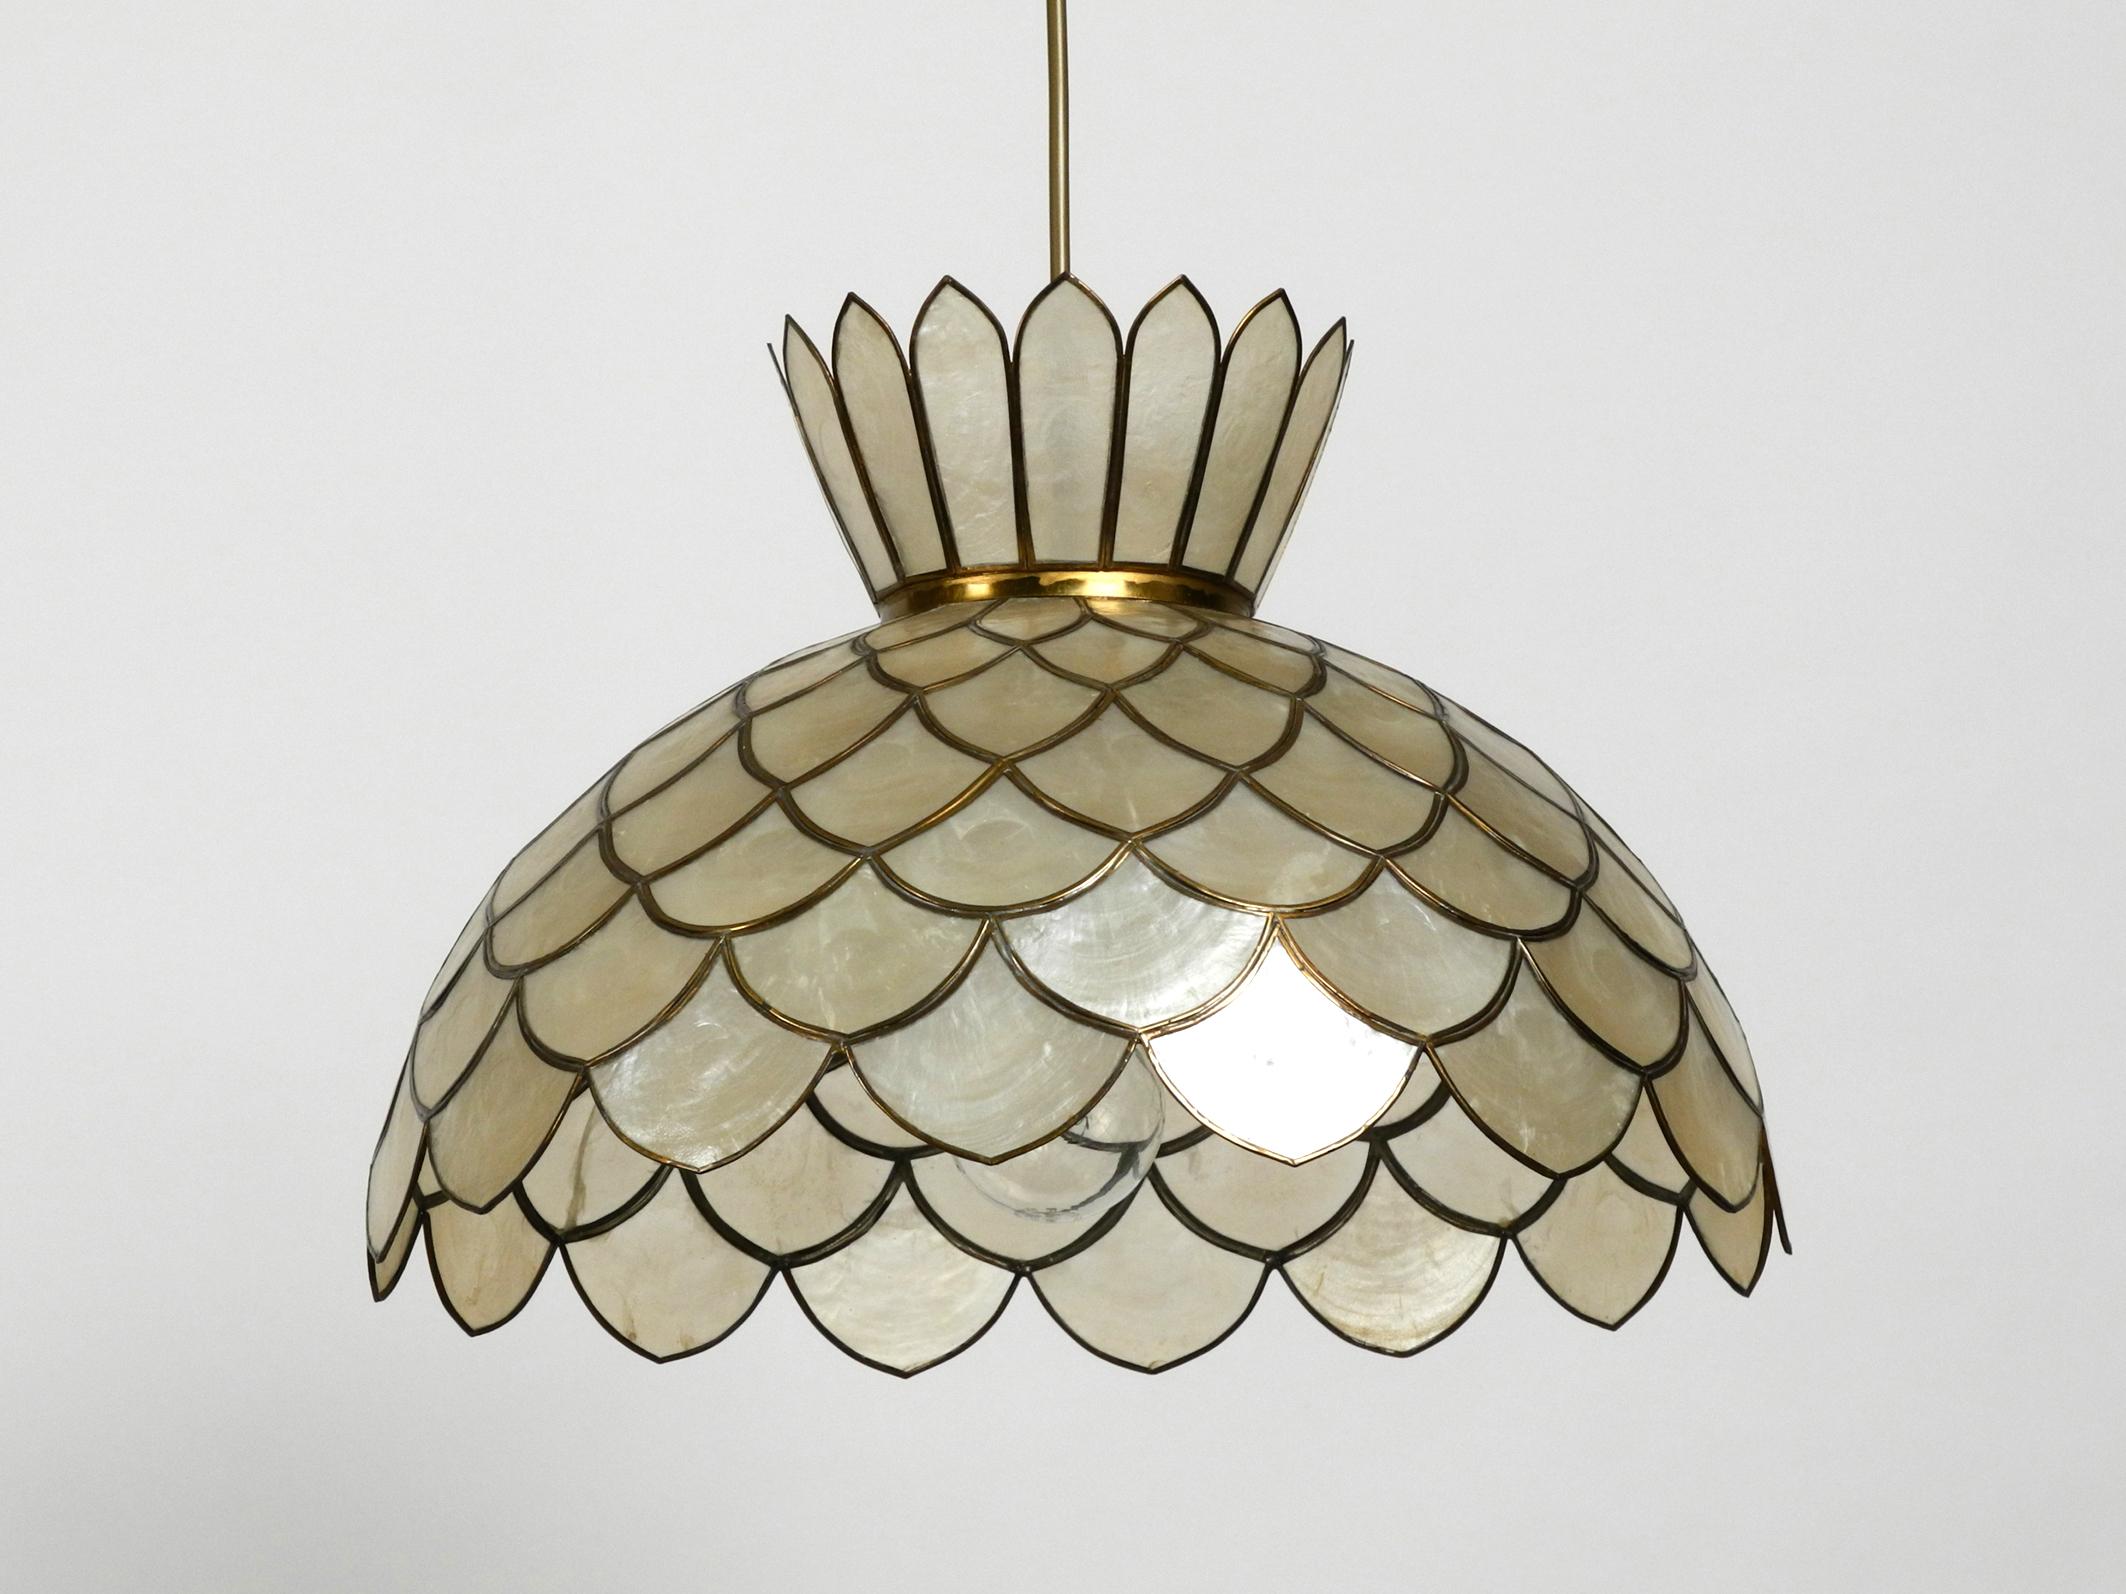 European Very Elegant Gorgeous Beautiful 1970s Pendant Lamp Made of Mother of Pearl